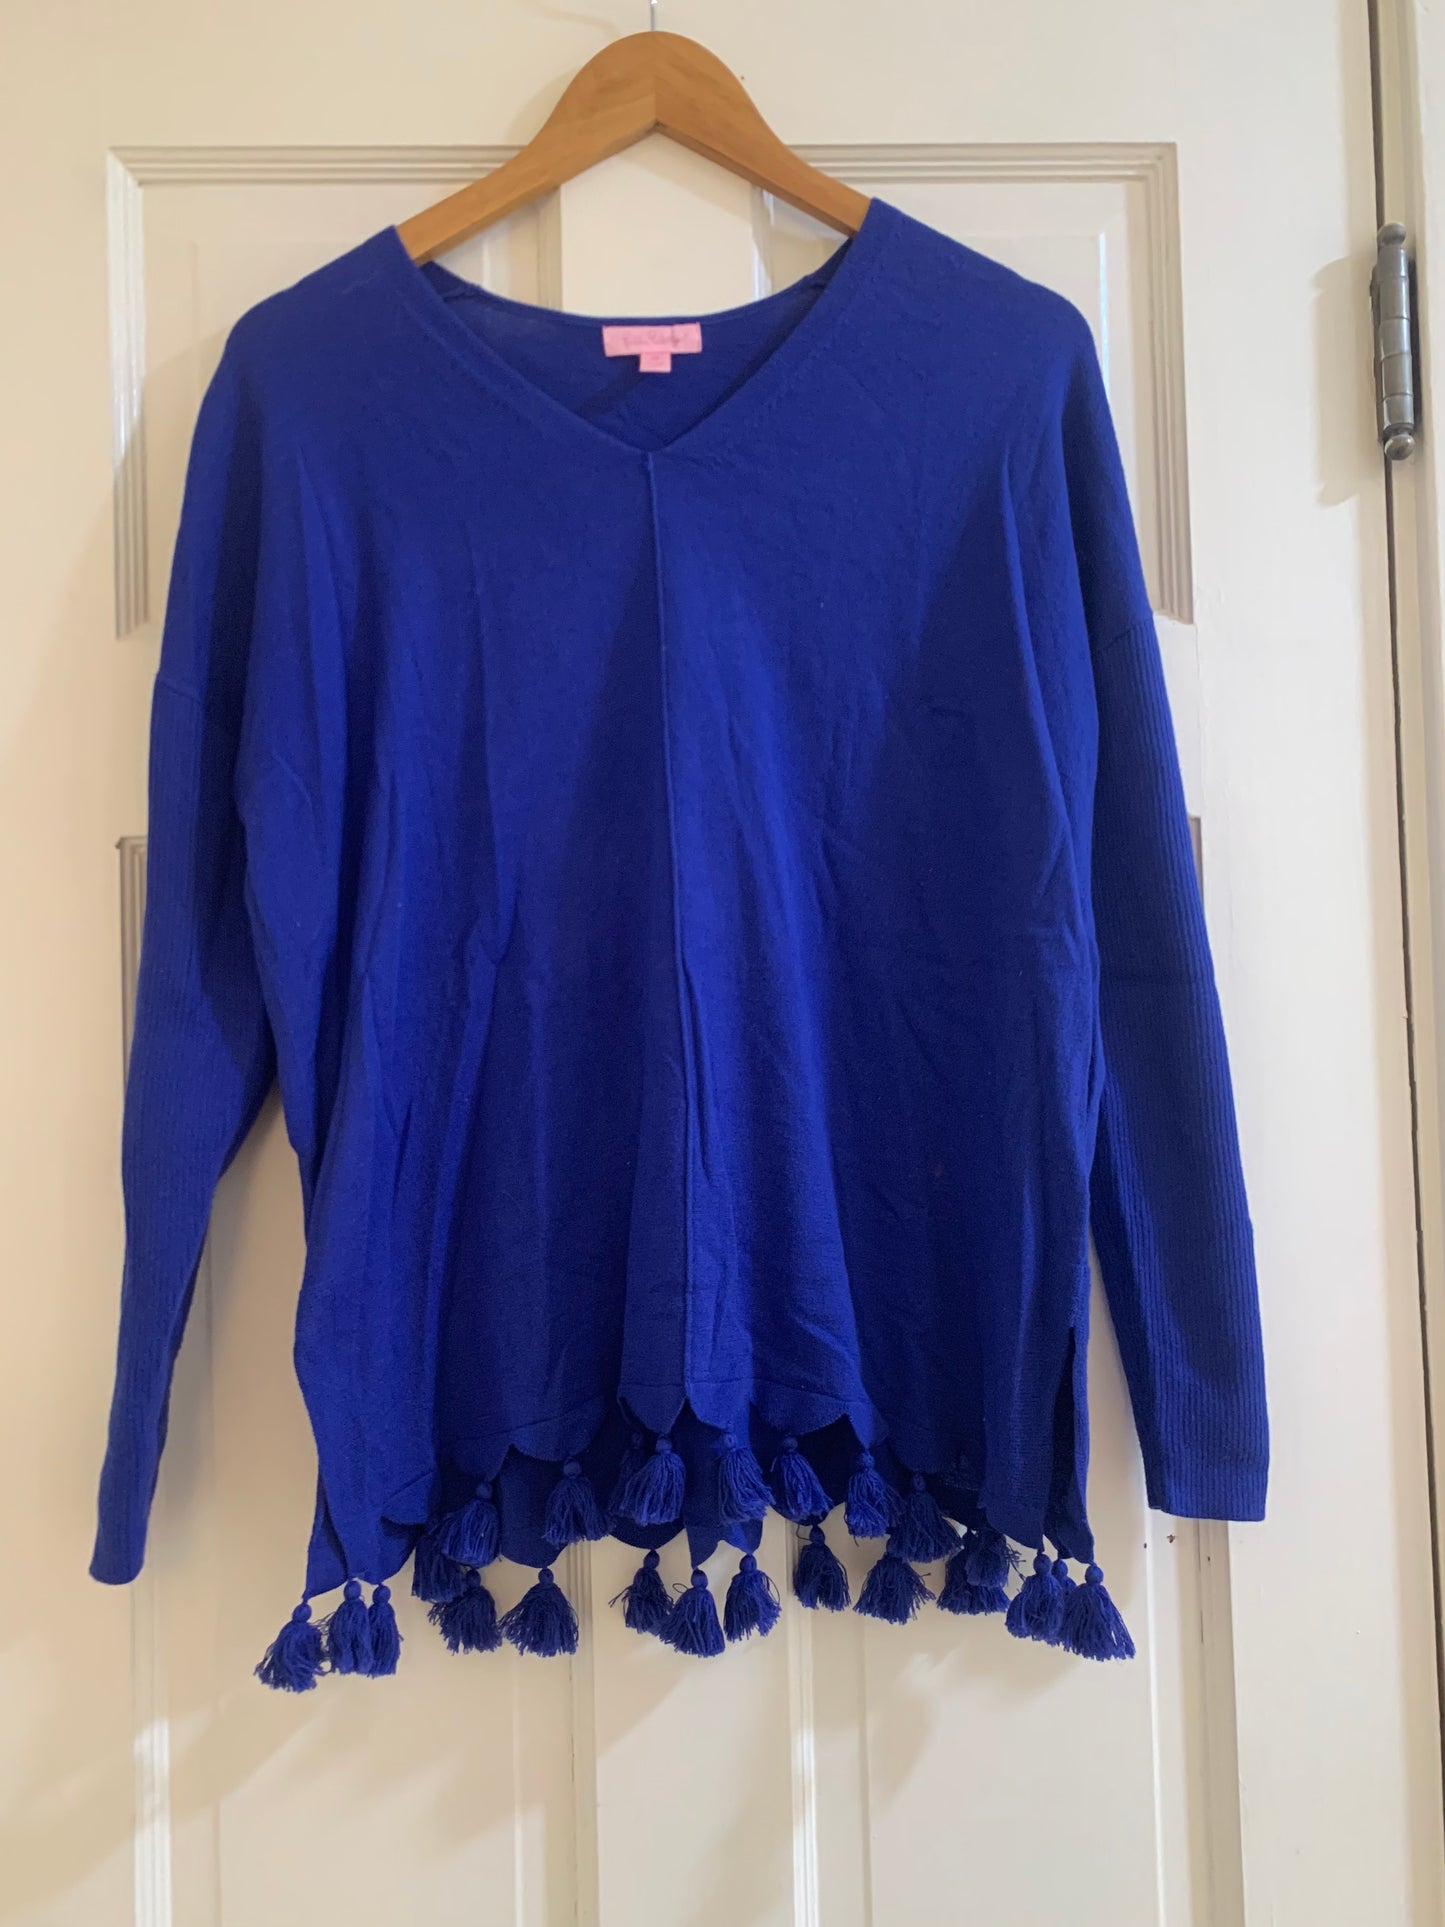 XS Womens Lilly Pulitzer Blue Sweater